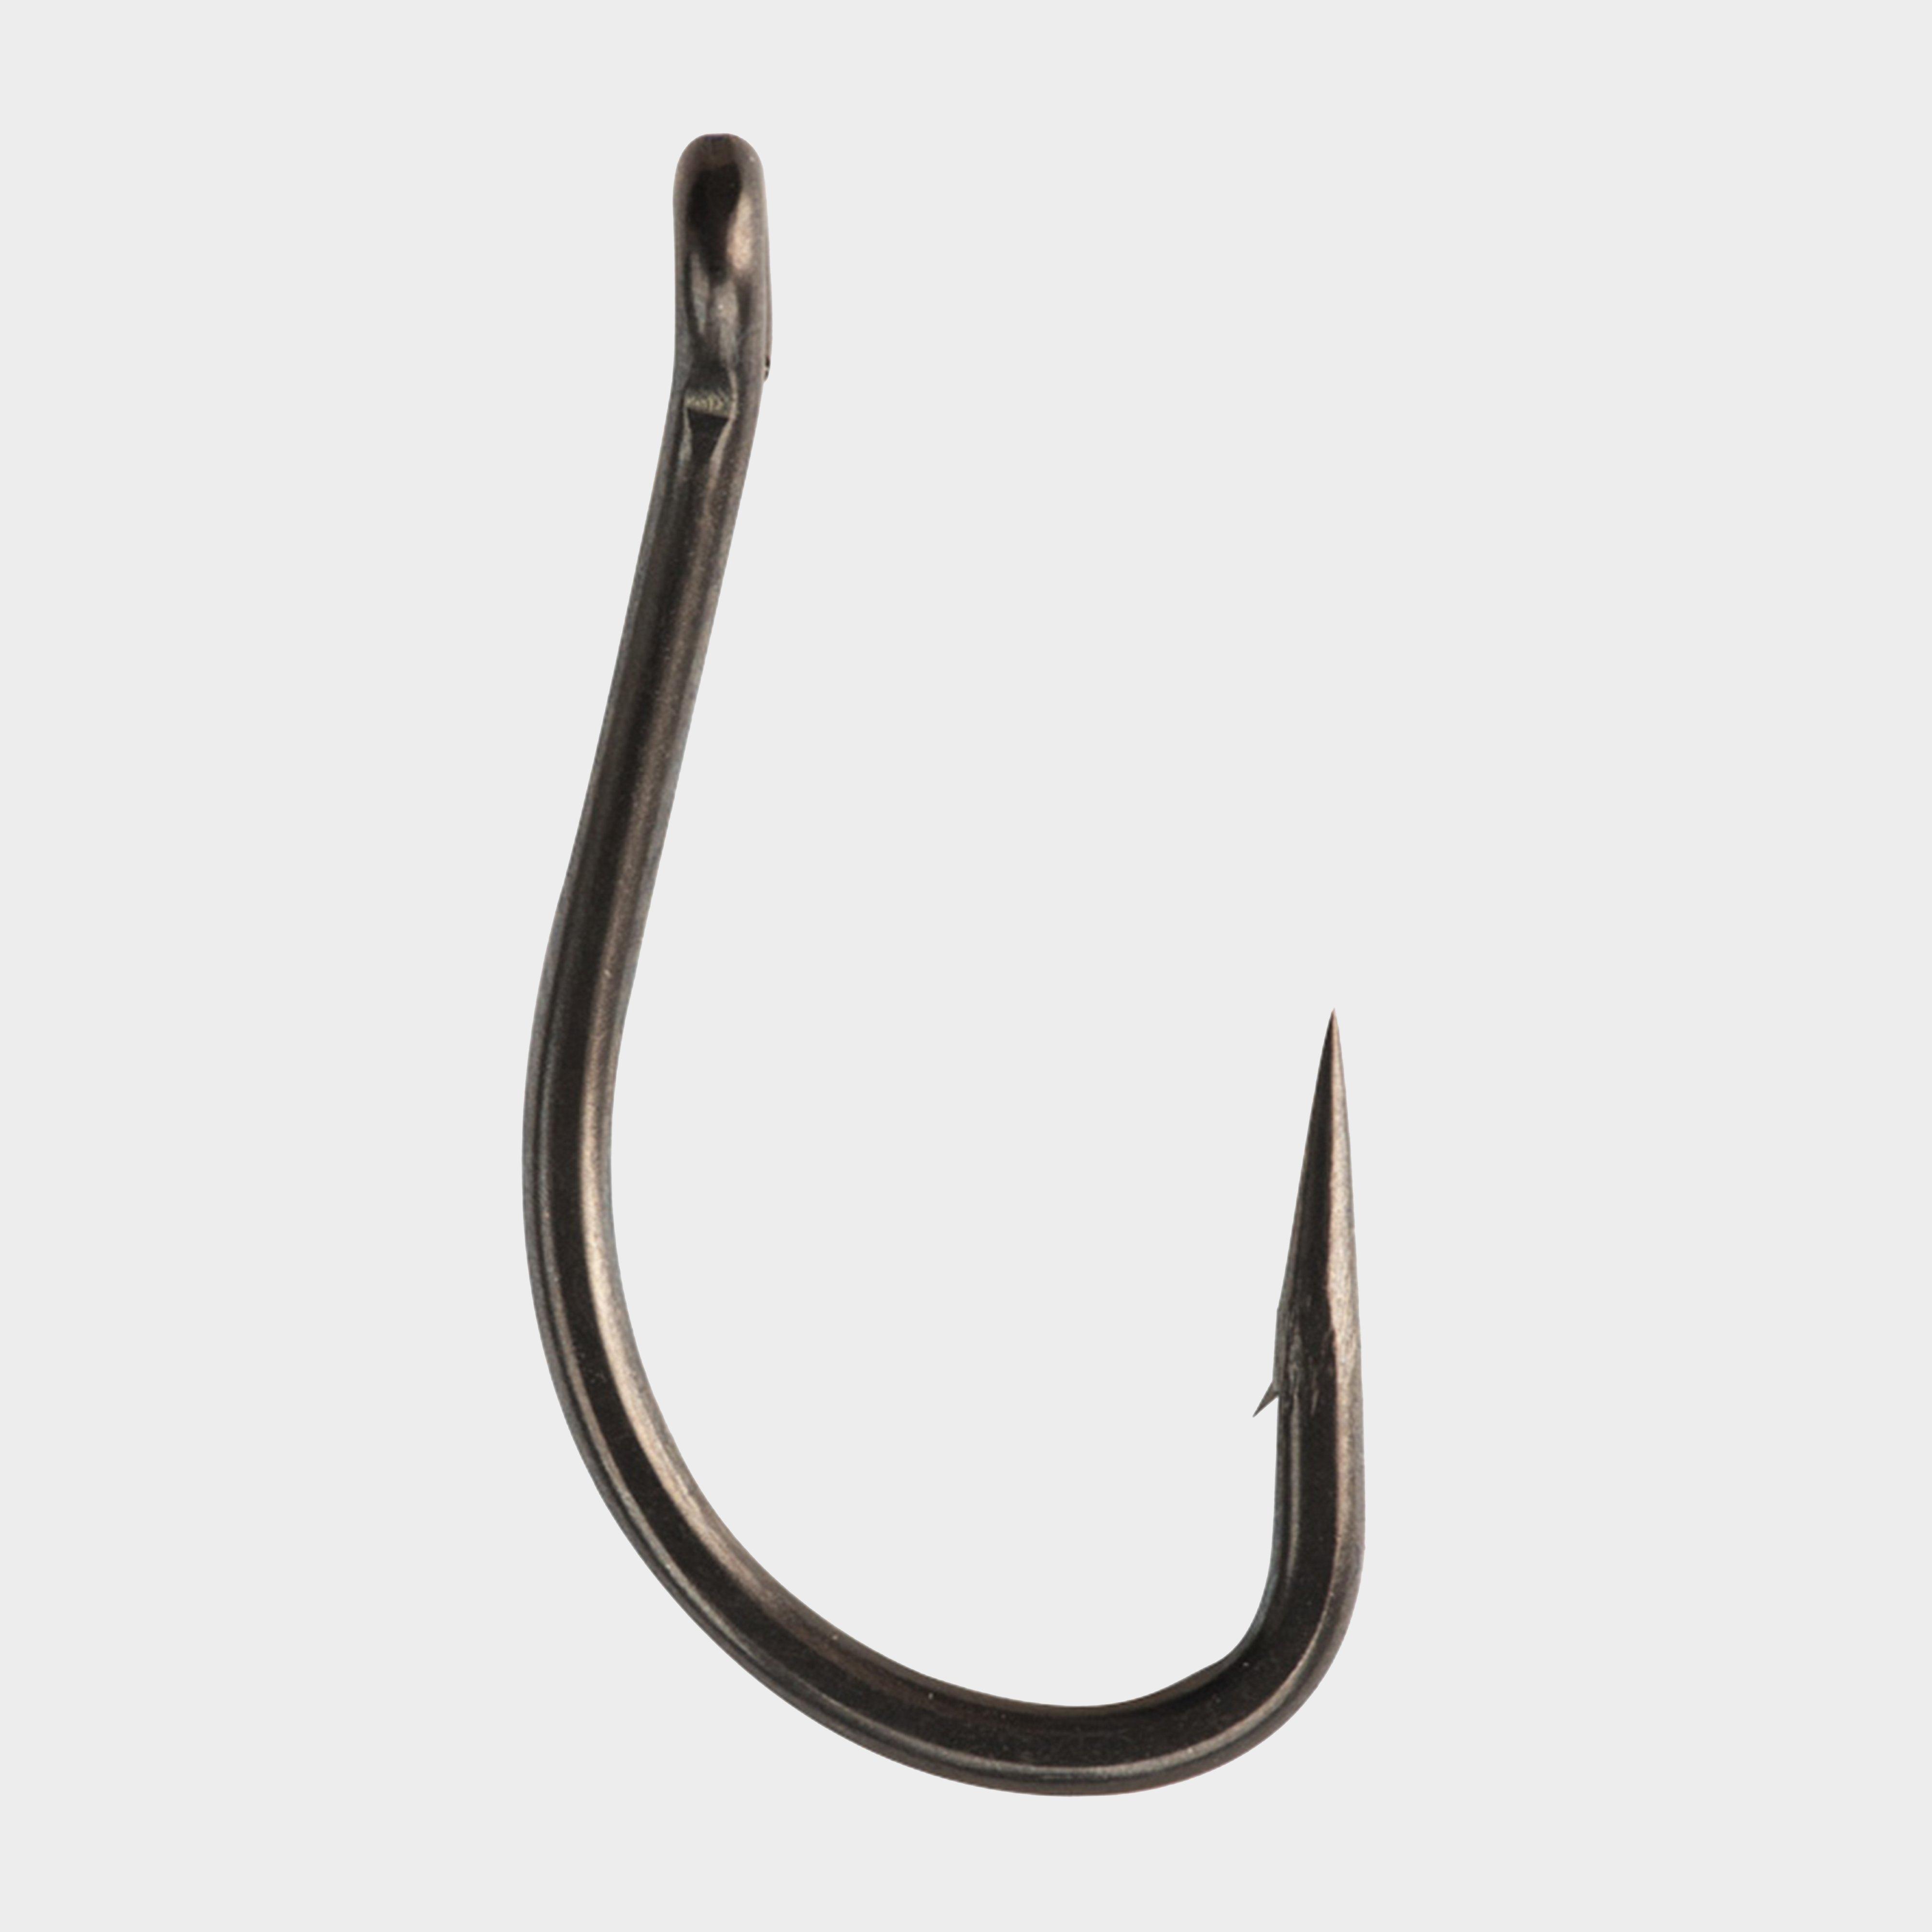 Photos - Fishing Hook / Jig Head Angler THINKING  Out-Turned Eye Hook Size 5  (Barbed)